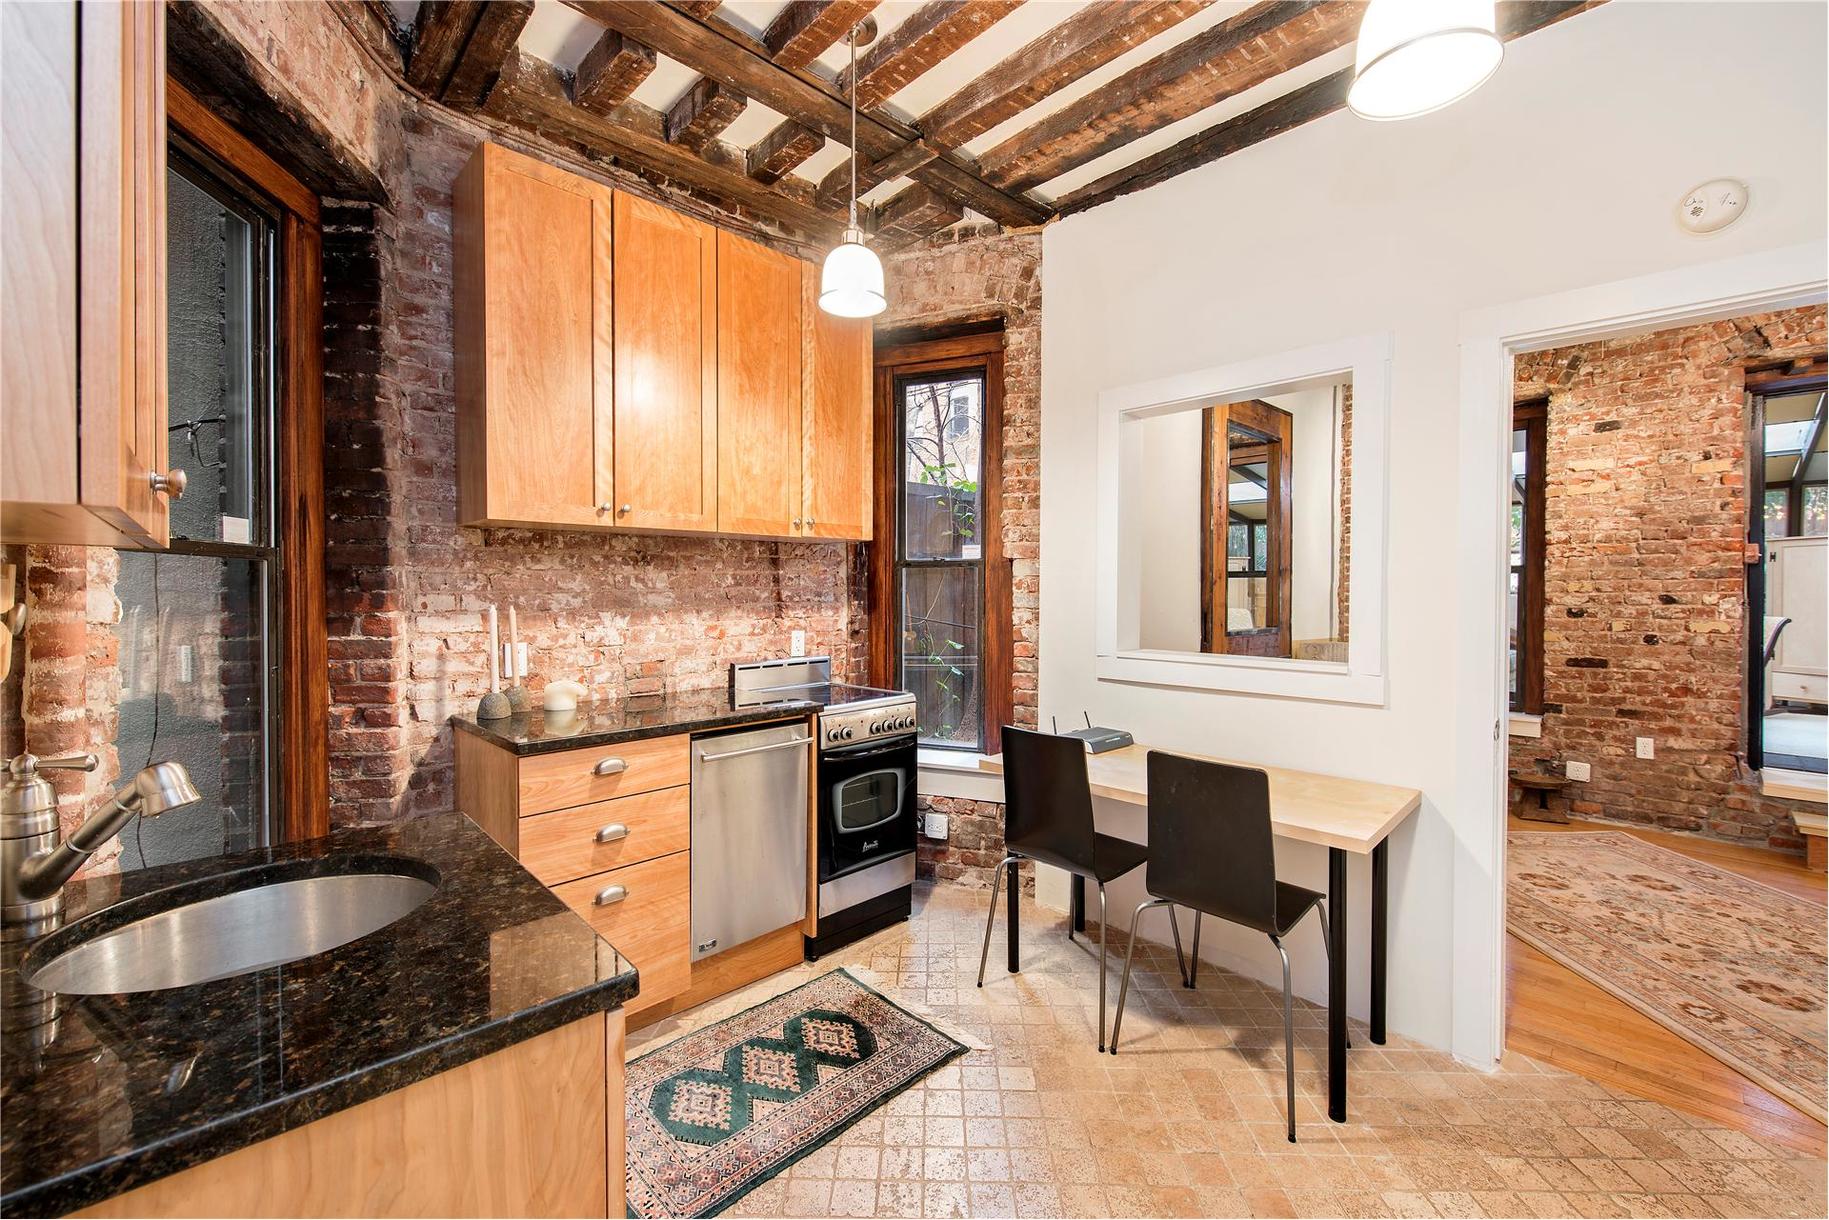 228 East 13th Street, East Village, Studio, Low Six Figures, East Village apartment for sale, co-ops, quirky home, sunroom